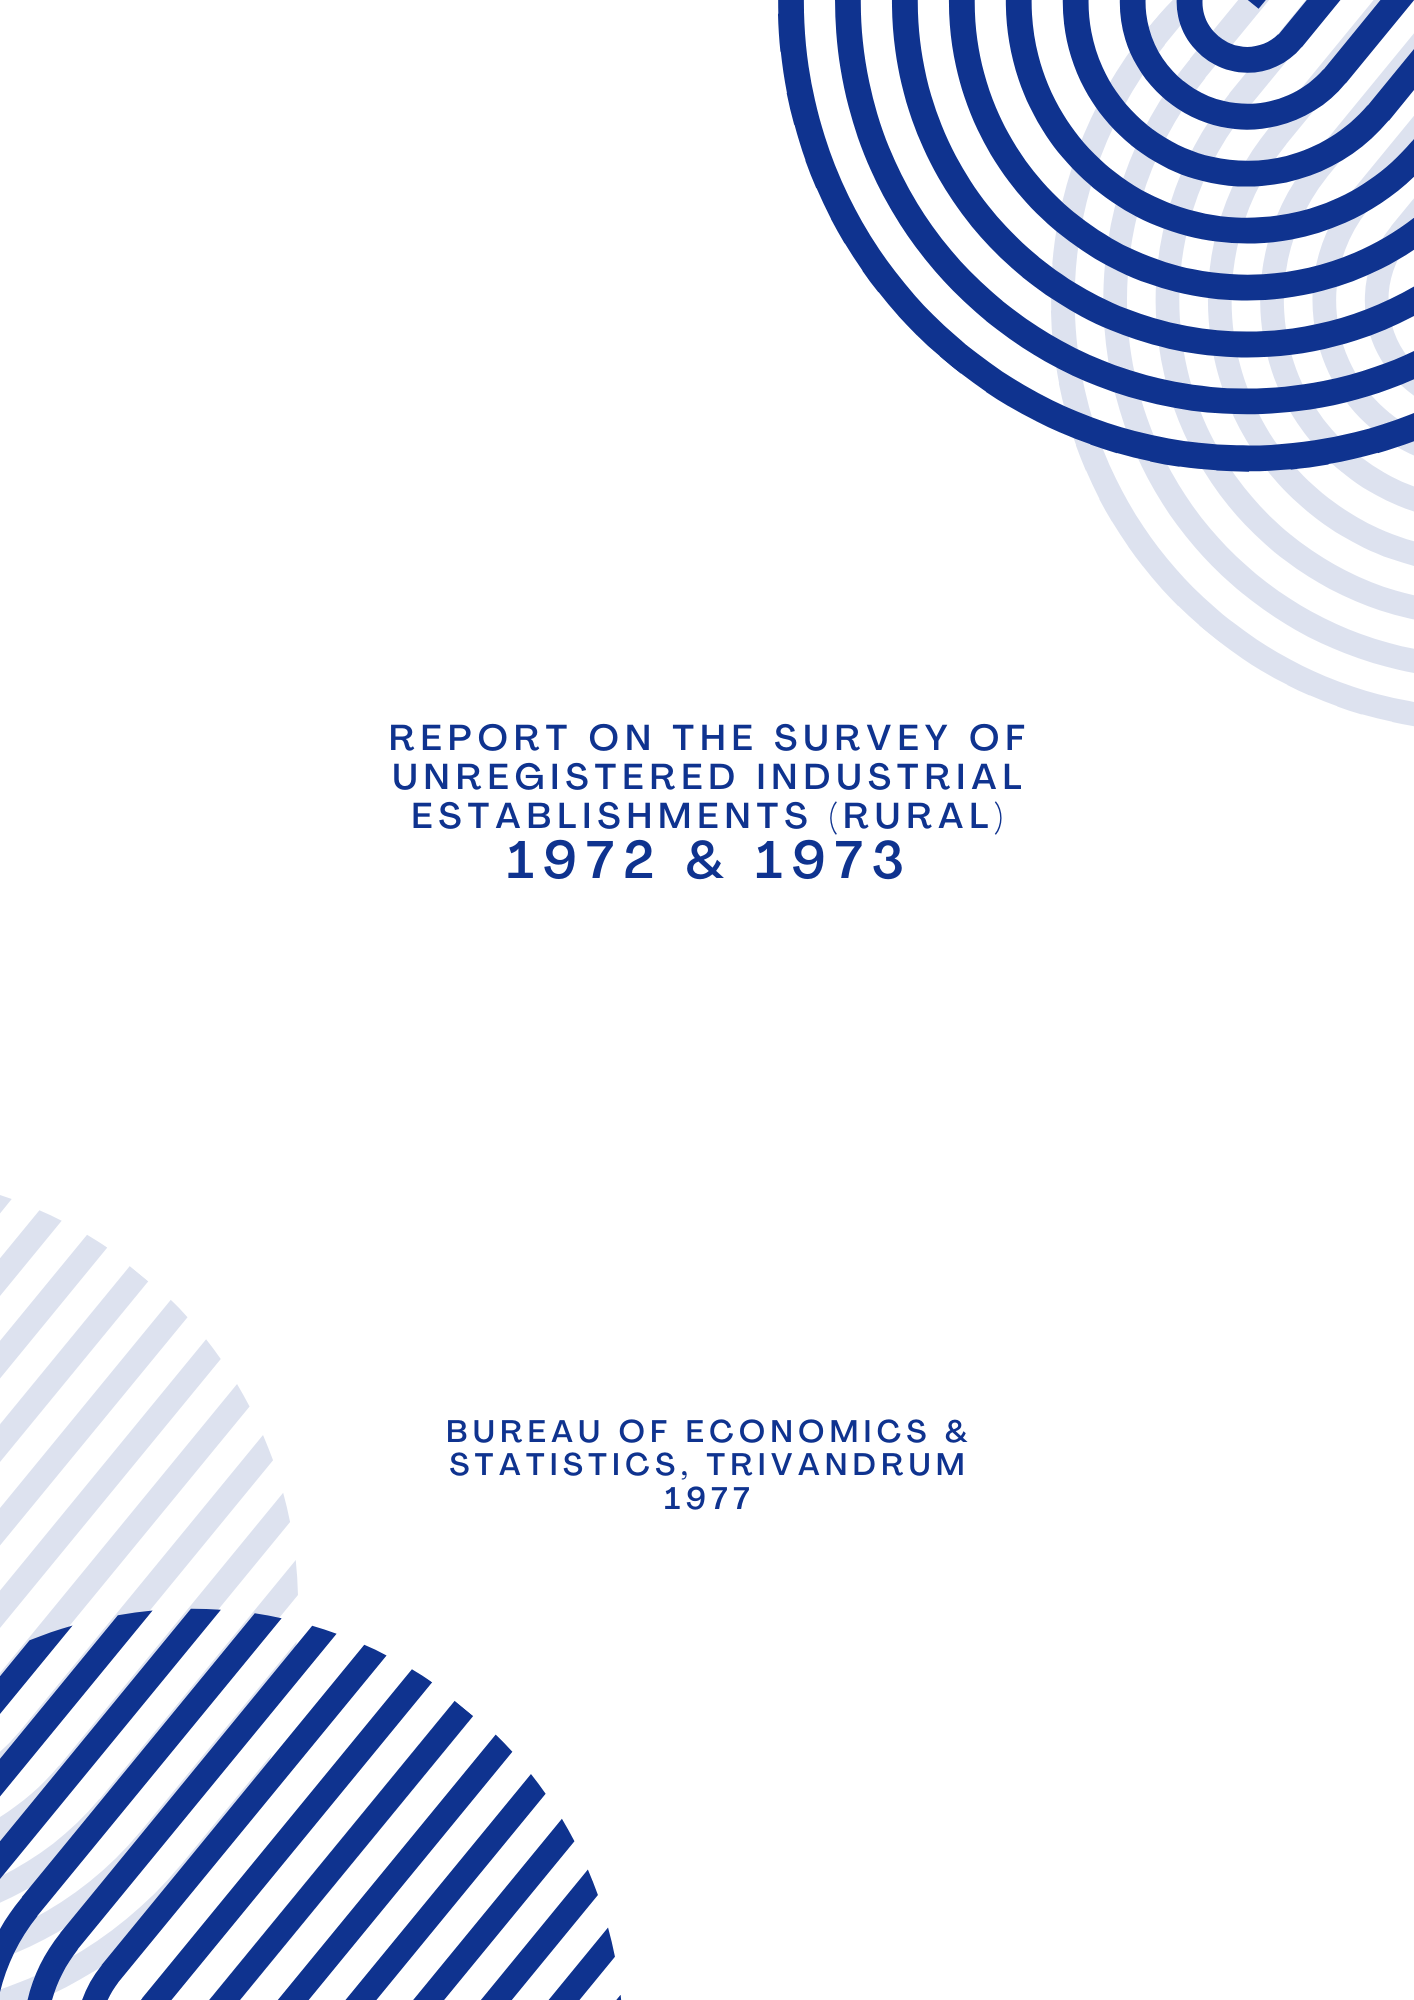 Report on the Survey of Unregistered Industrial Establishments (Rural) 1972 & 1973